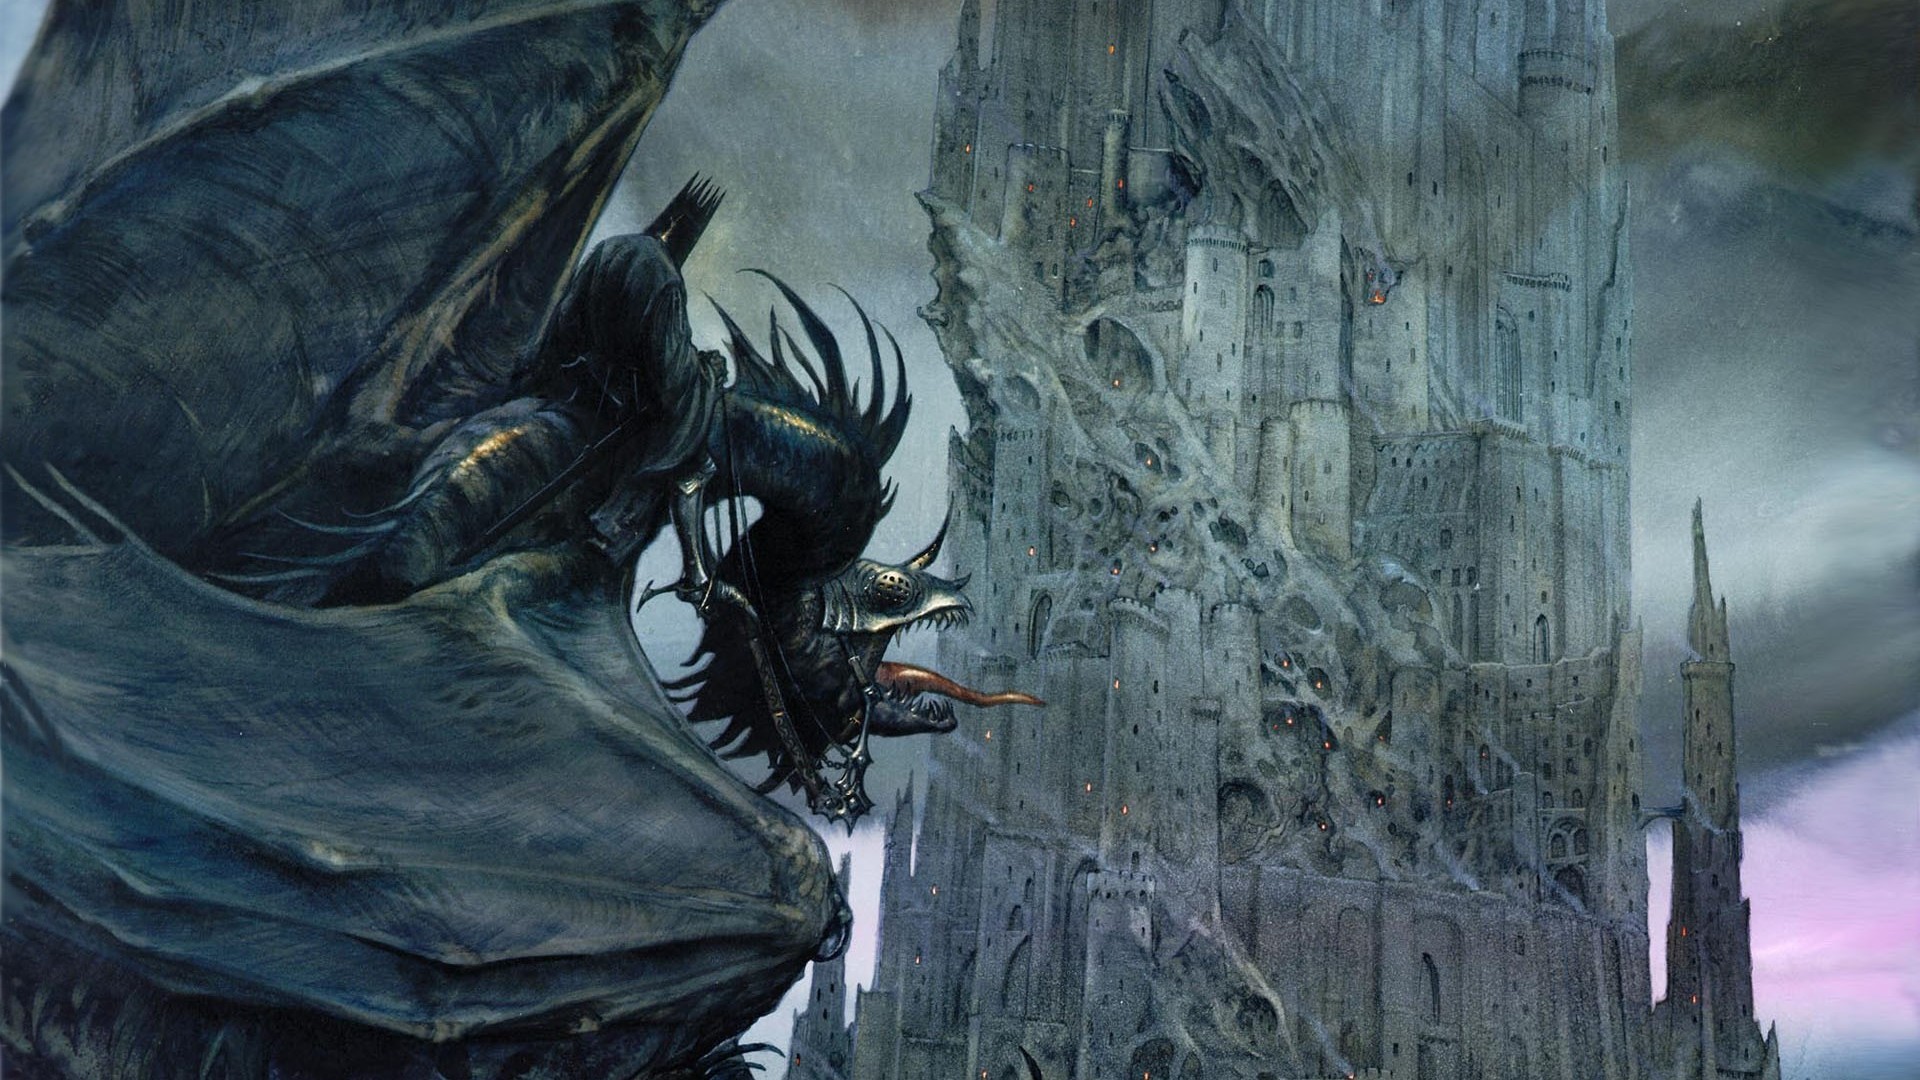 General 1920x1080 digital art fantasy art Barad-dûr The Lord of the Rings dragon castle flying tongues Witchking of Angmar John Howe Nazgûl J. R. R. Tolkien